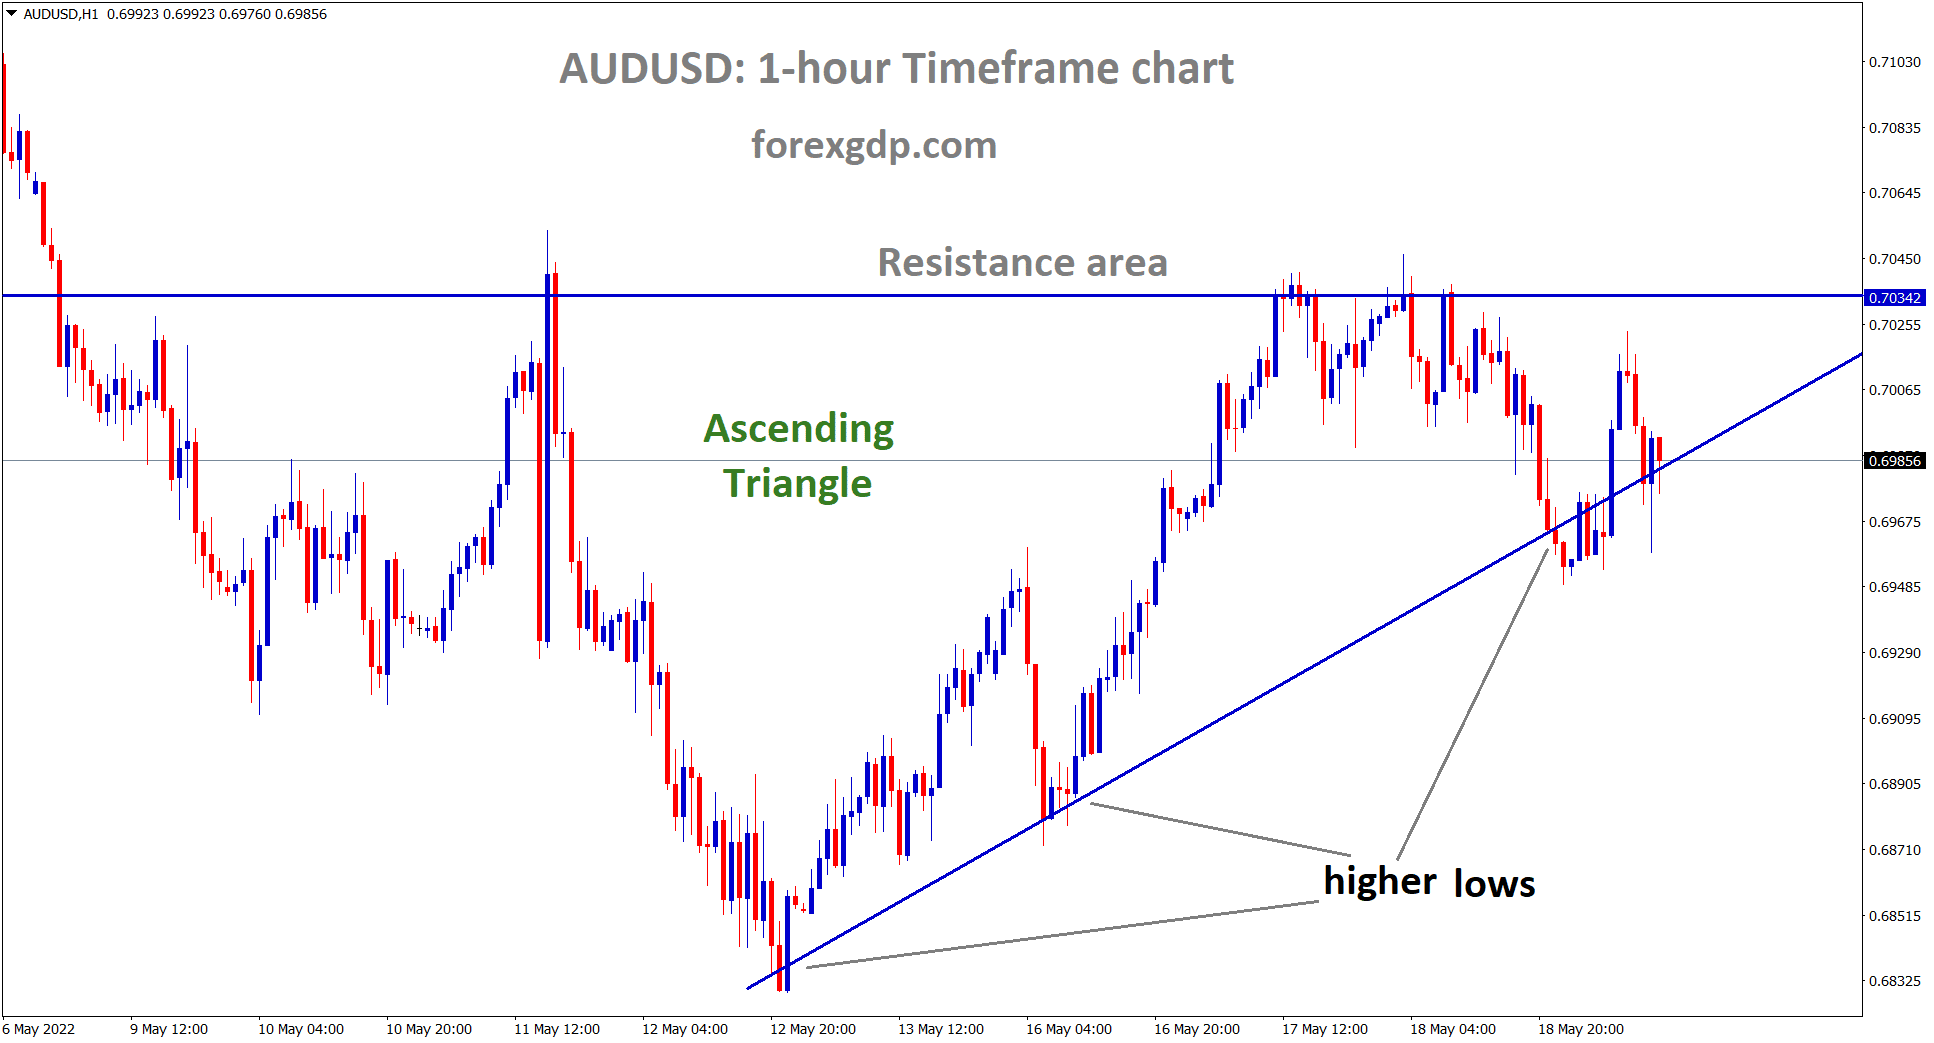 AUDUSD is moving in ascending triangle pattern and the market has reached the higher low area of the pattern.